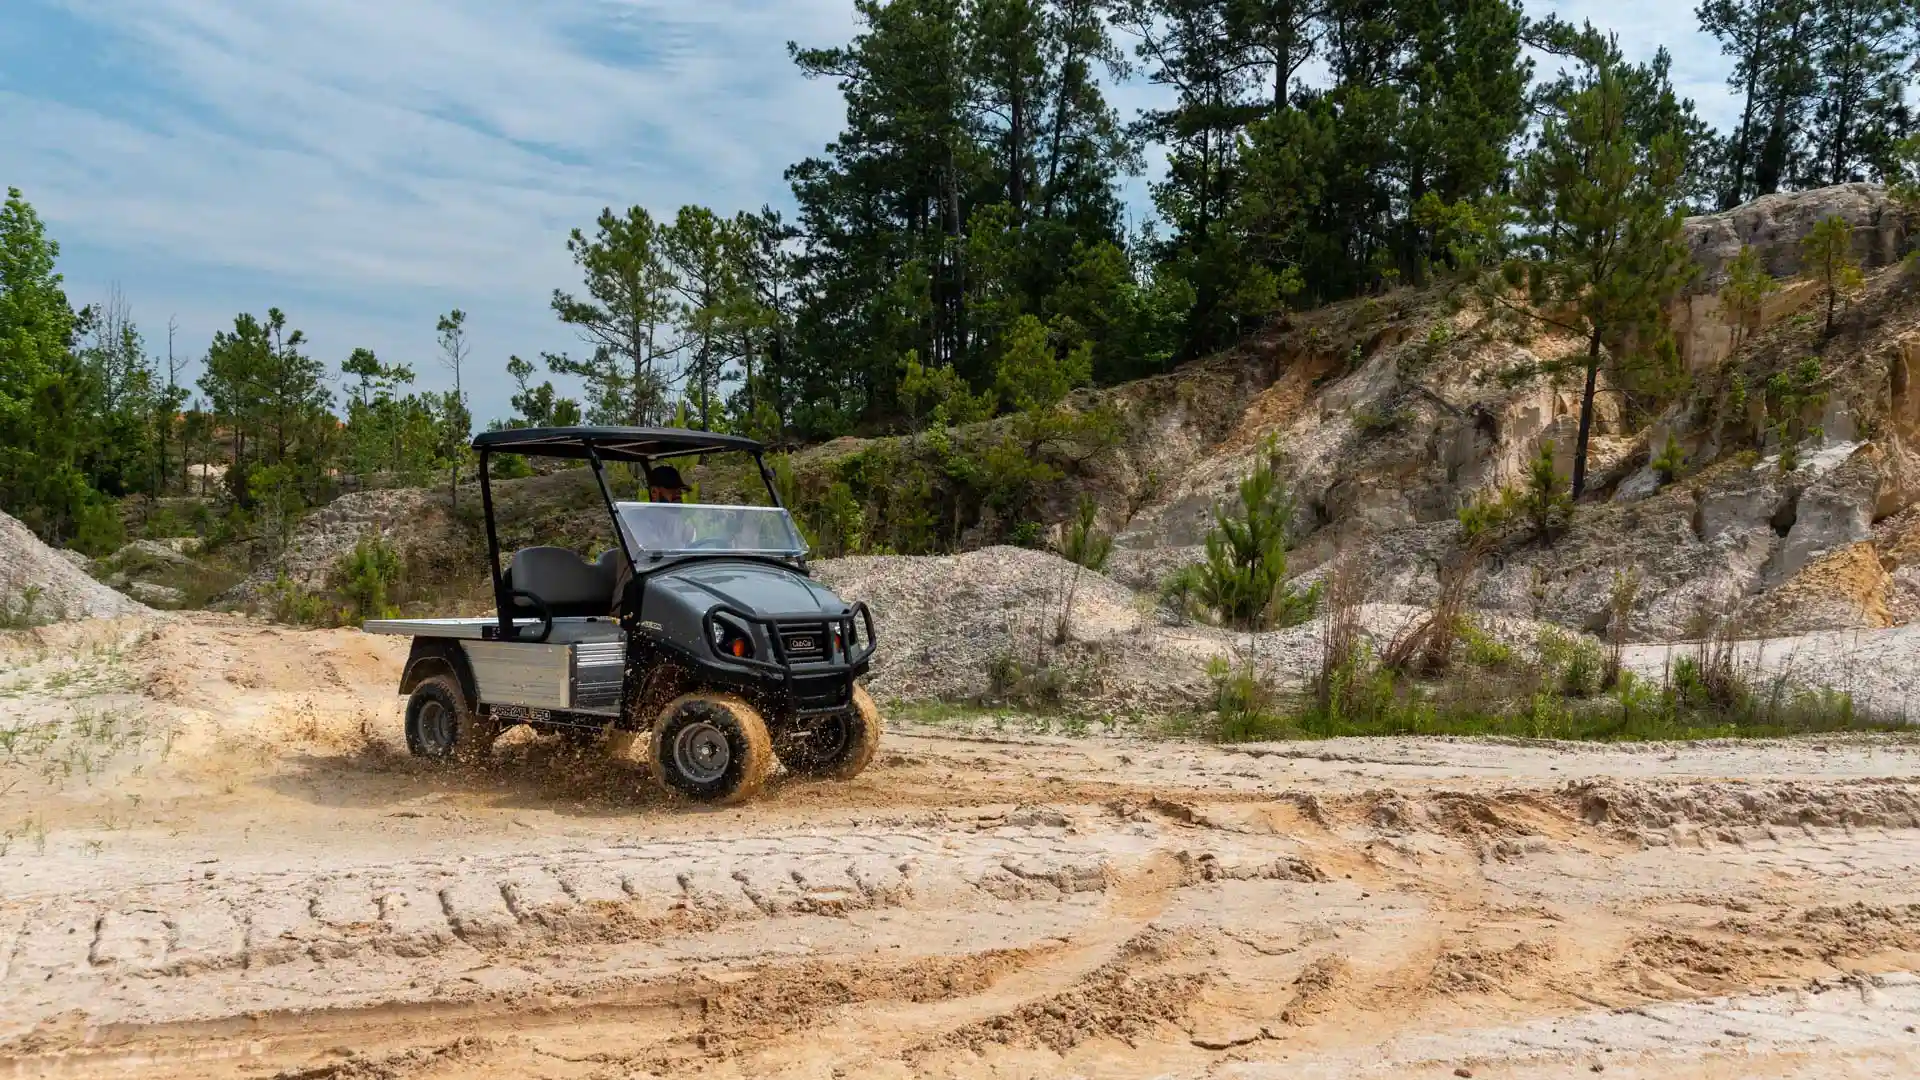 Carryall 550 work utility vehicle at quarry